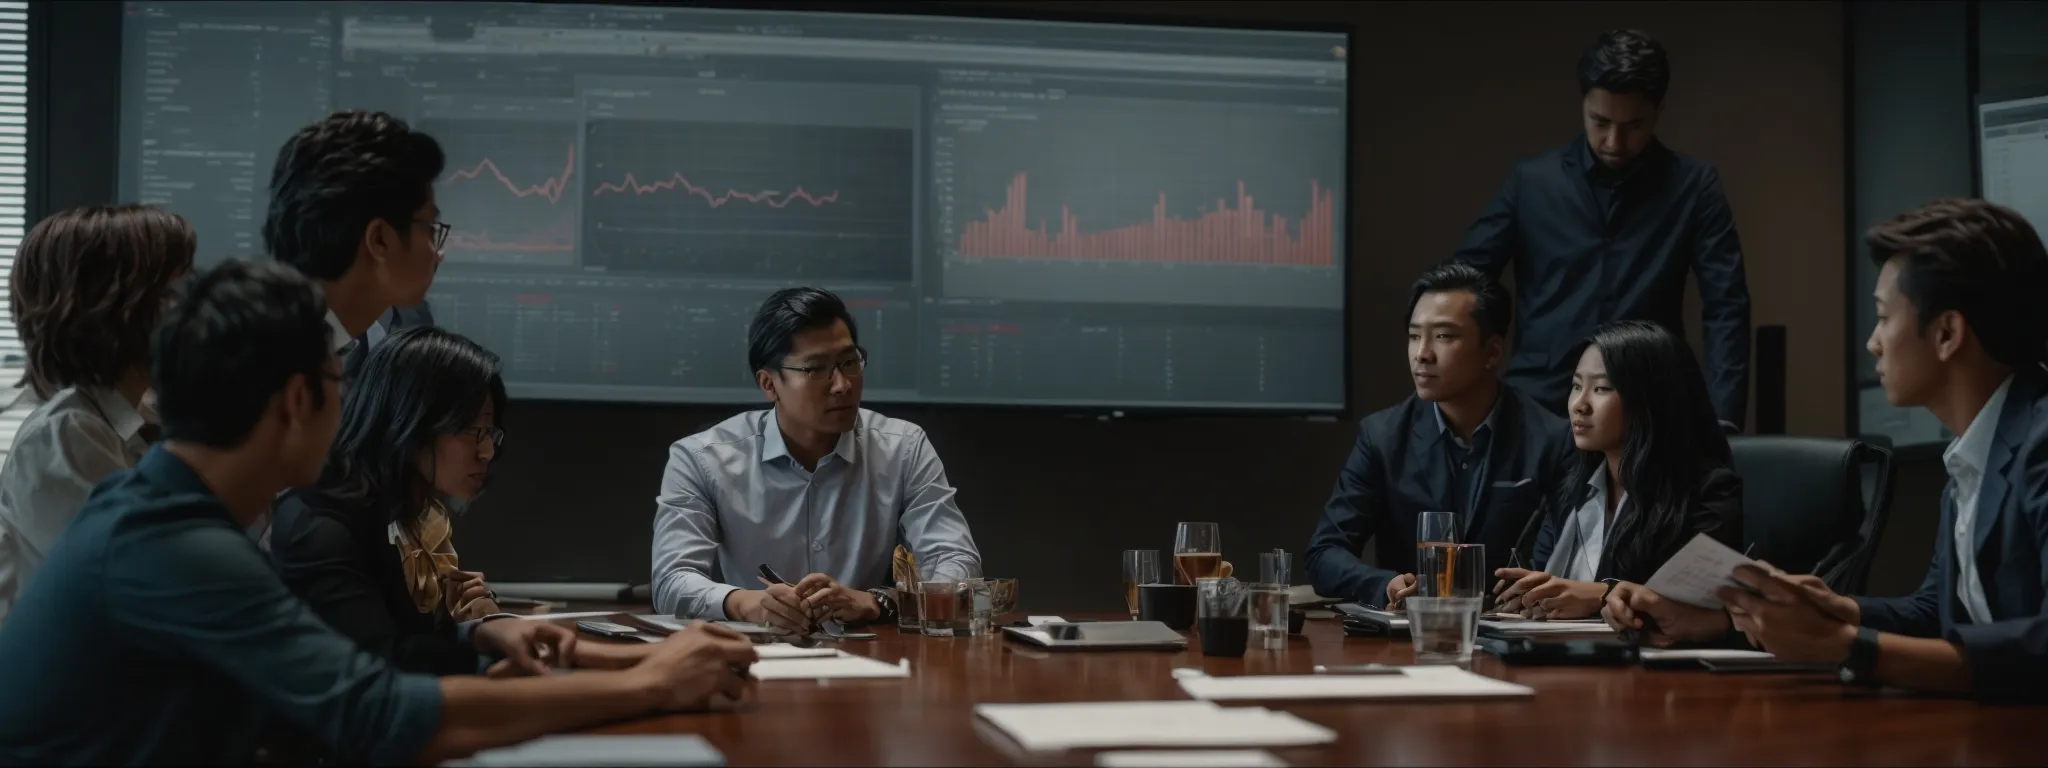 a group of professionals gathered around a large table, actively engaging with charts and graphs displayed on a screen during a strategy meeting.